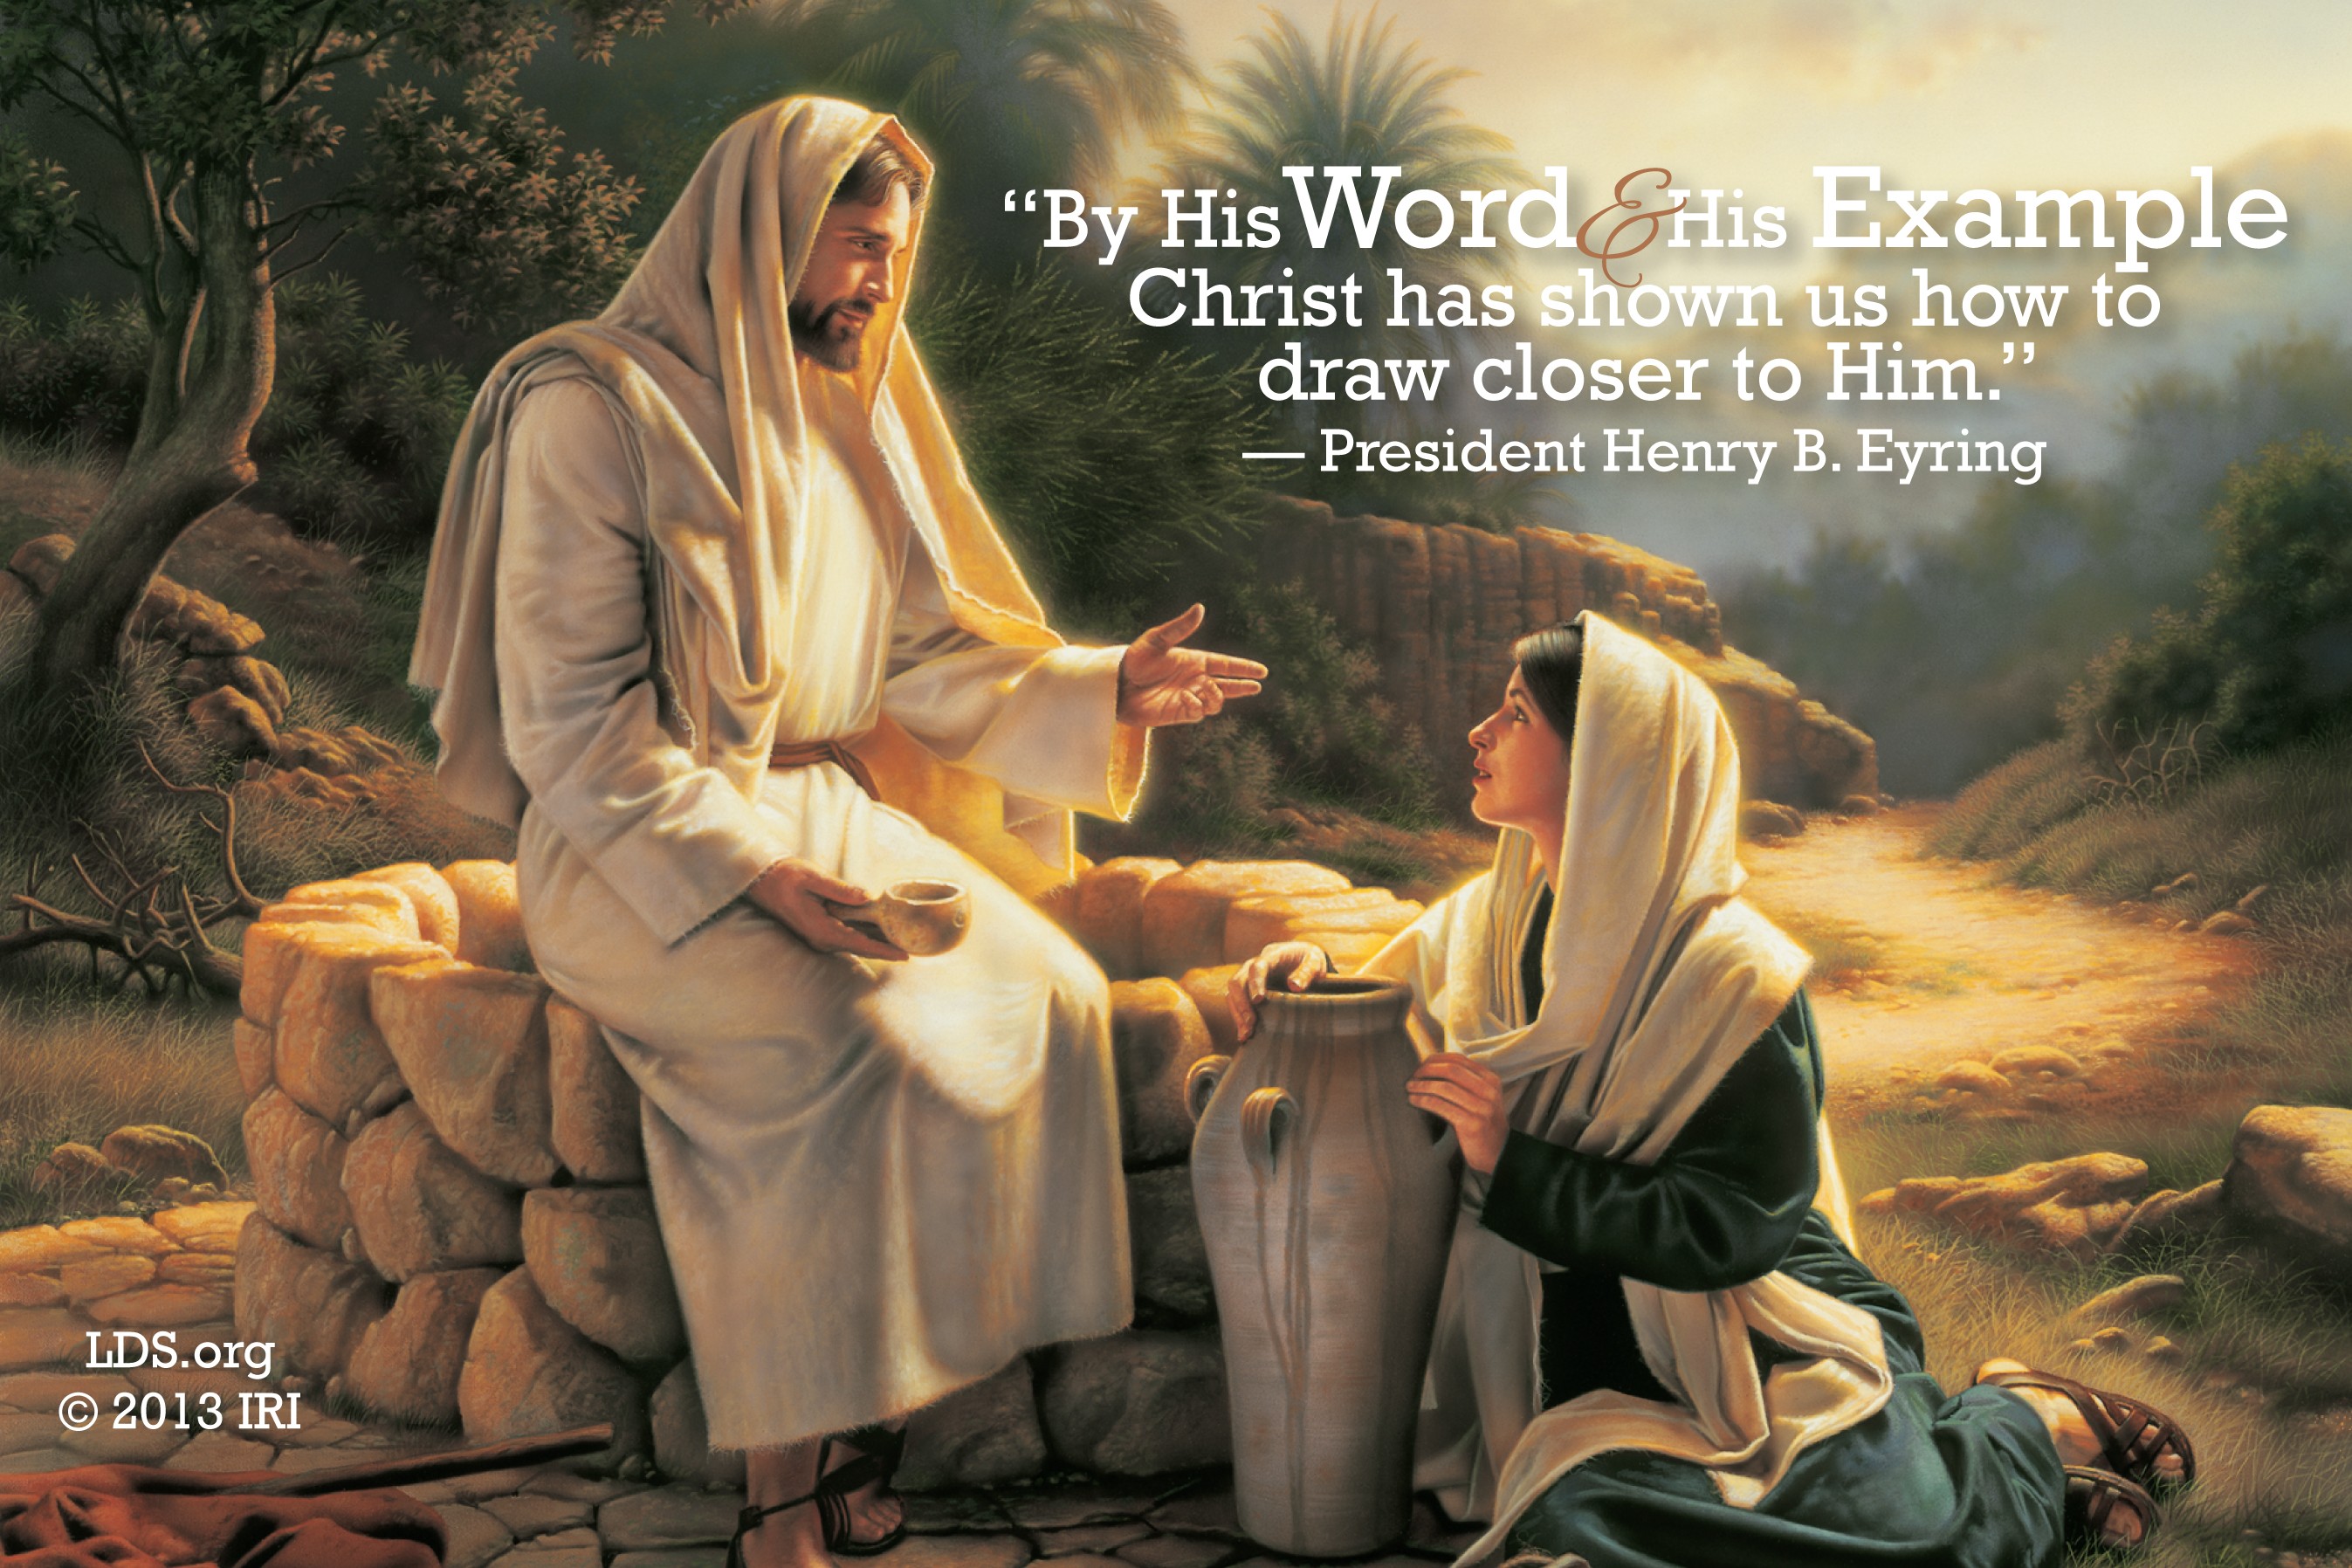 A painting of Christ and the woman at the well, coupled with a quote by President Henry B. Eyring: “Christ has shown us how to draw closer to Him.”